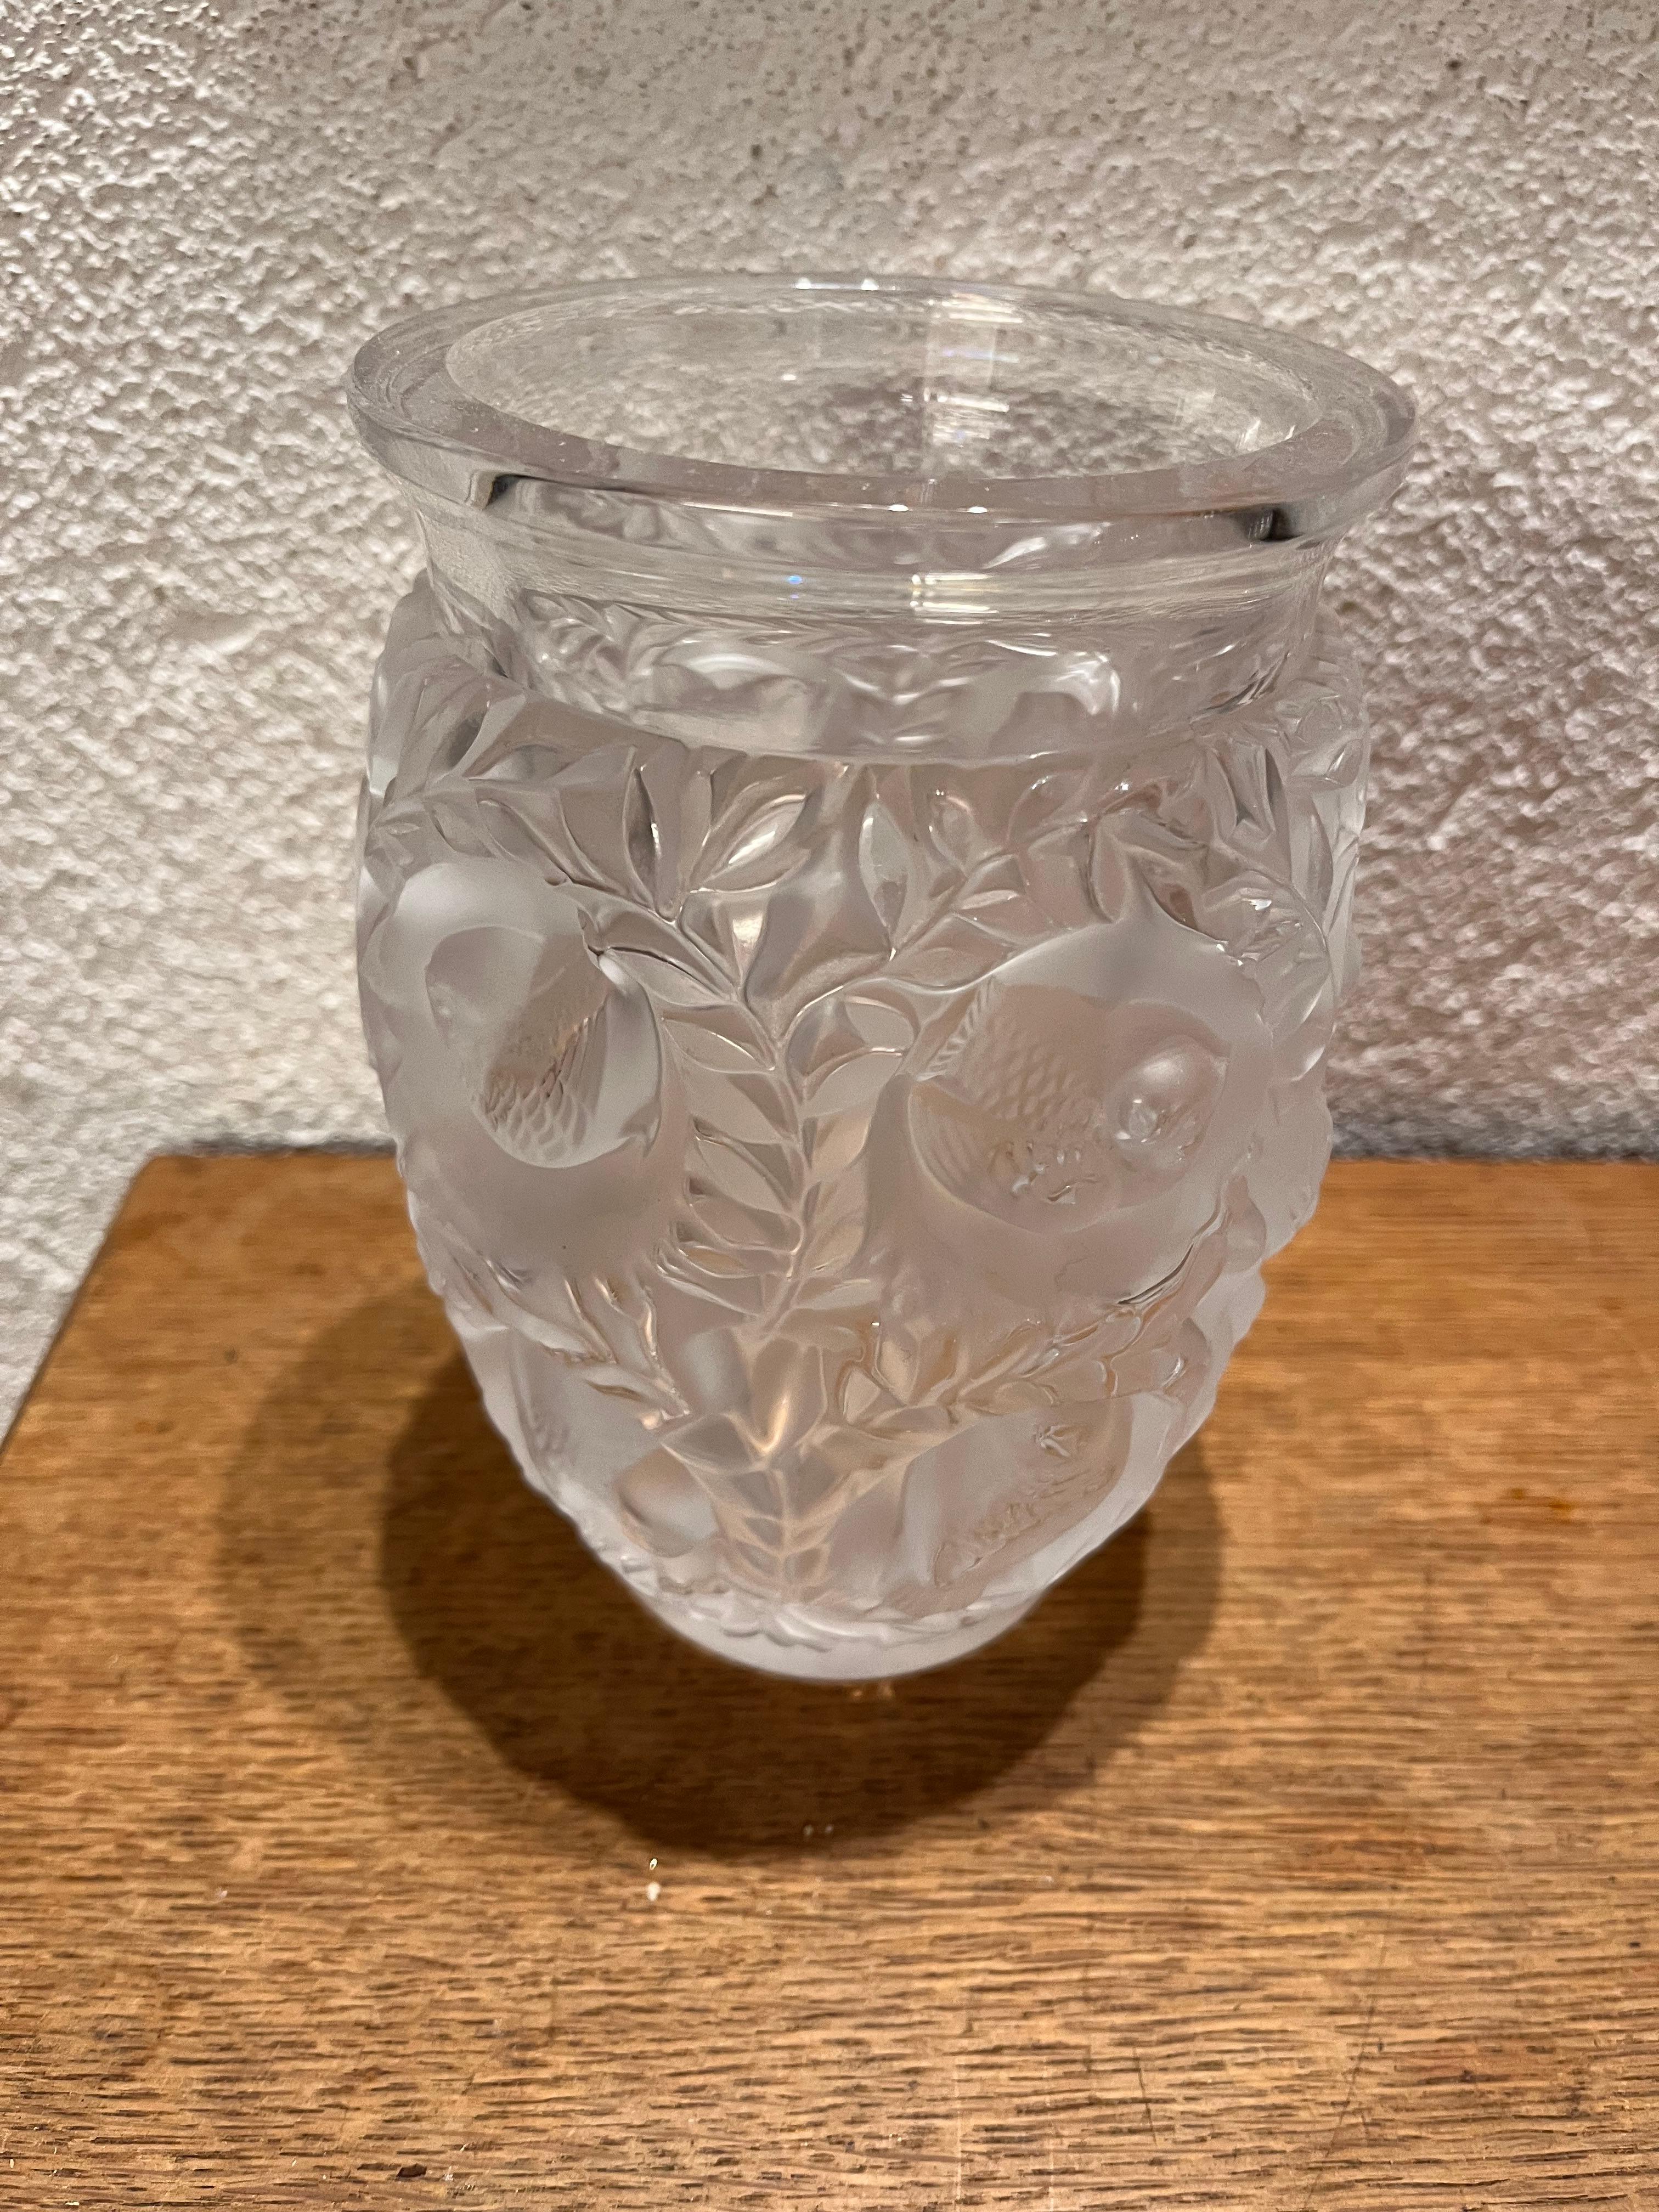 Bagatelle vase is an emblematic Lalique piece and best seller. From a naturalist inspiration, it was drawn for the first time in 1939. This vase became a classic of the collection combining fauna and flora themes. This vase takes us to a dreamlike